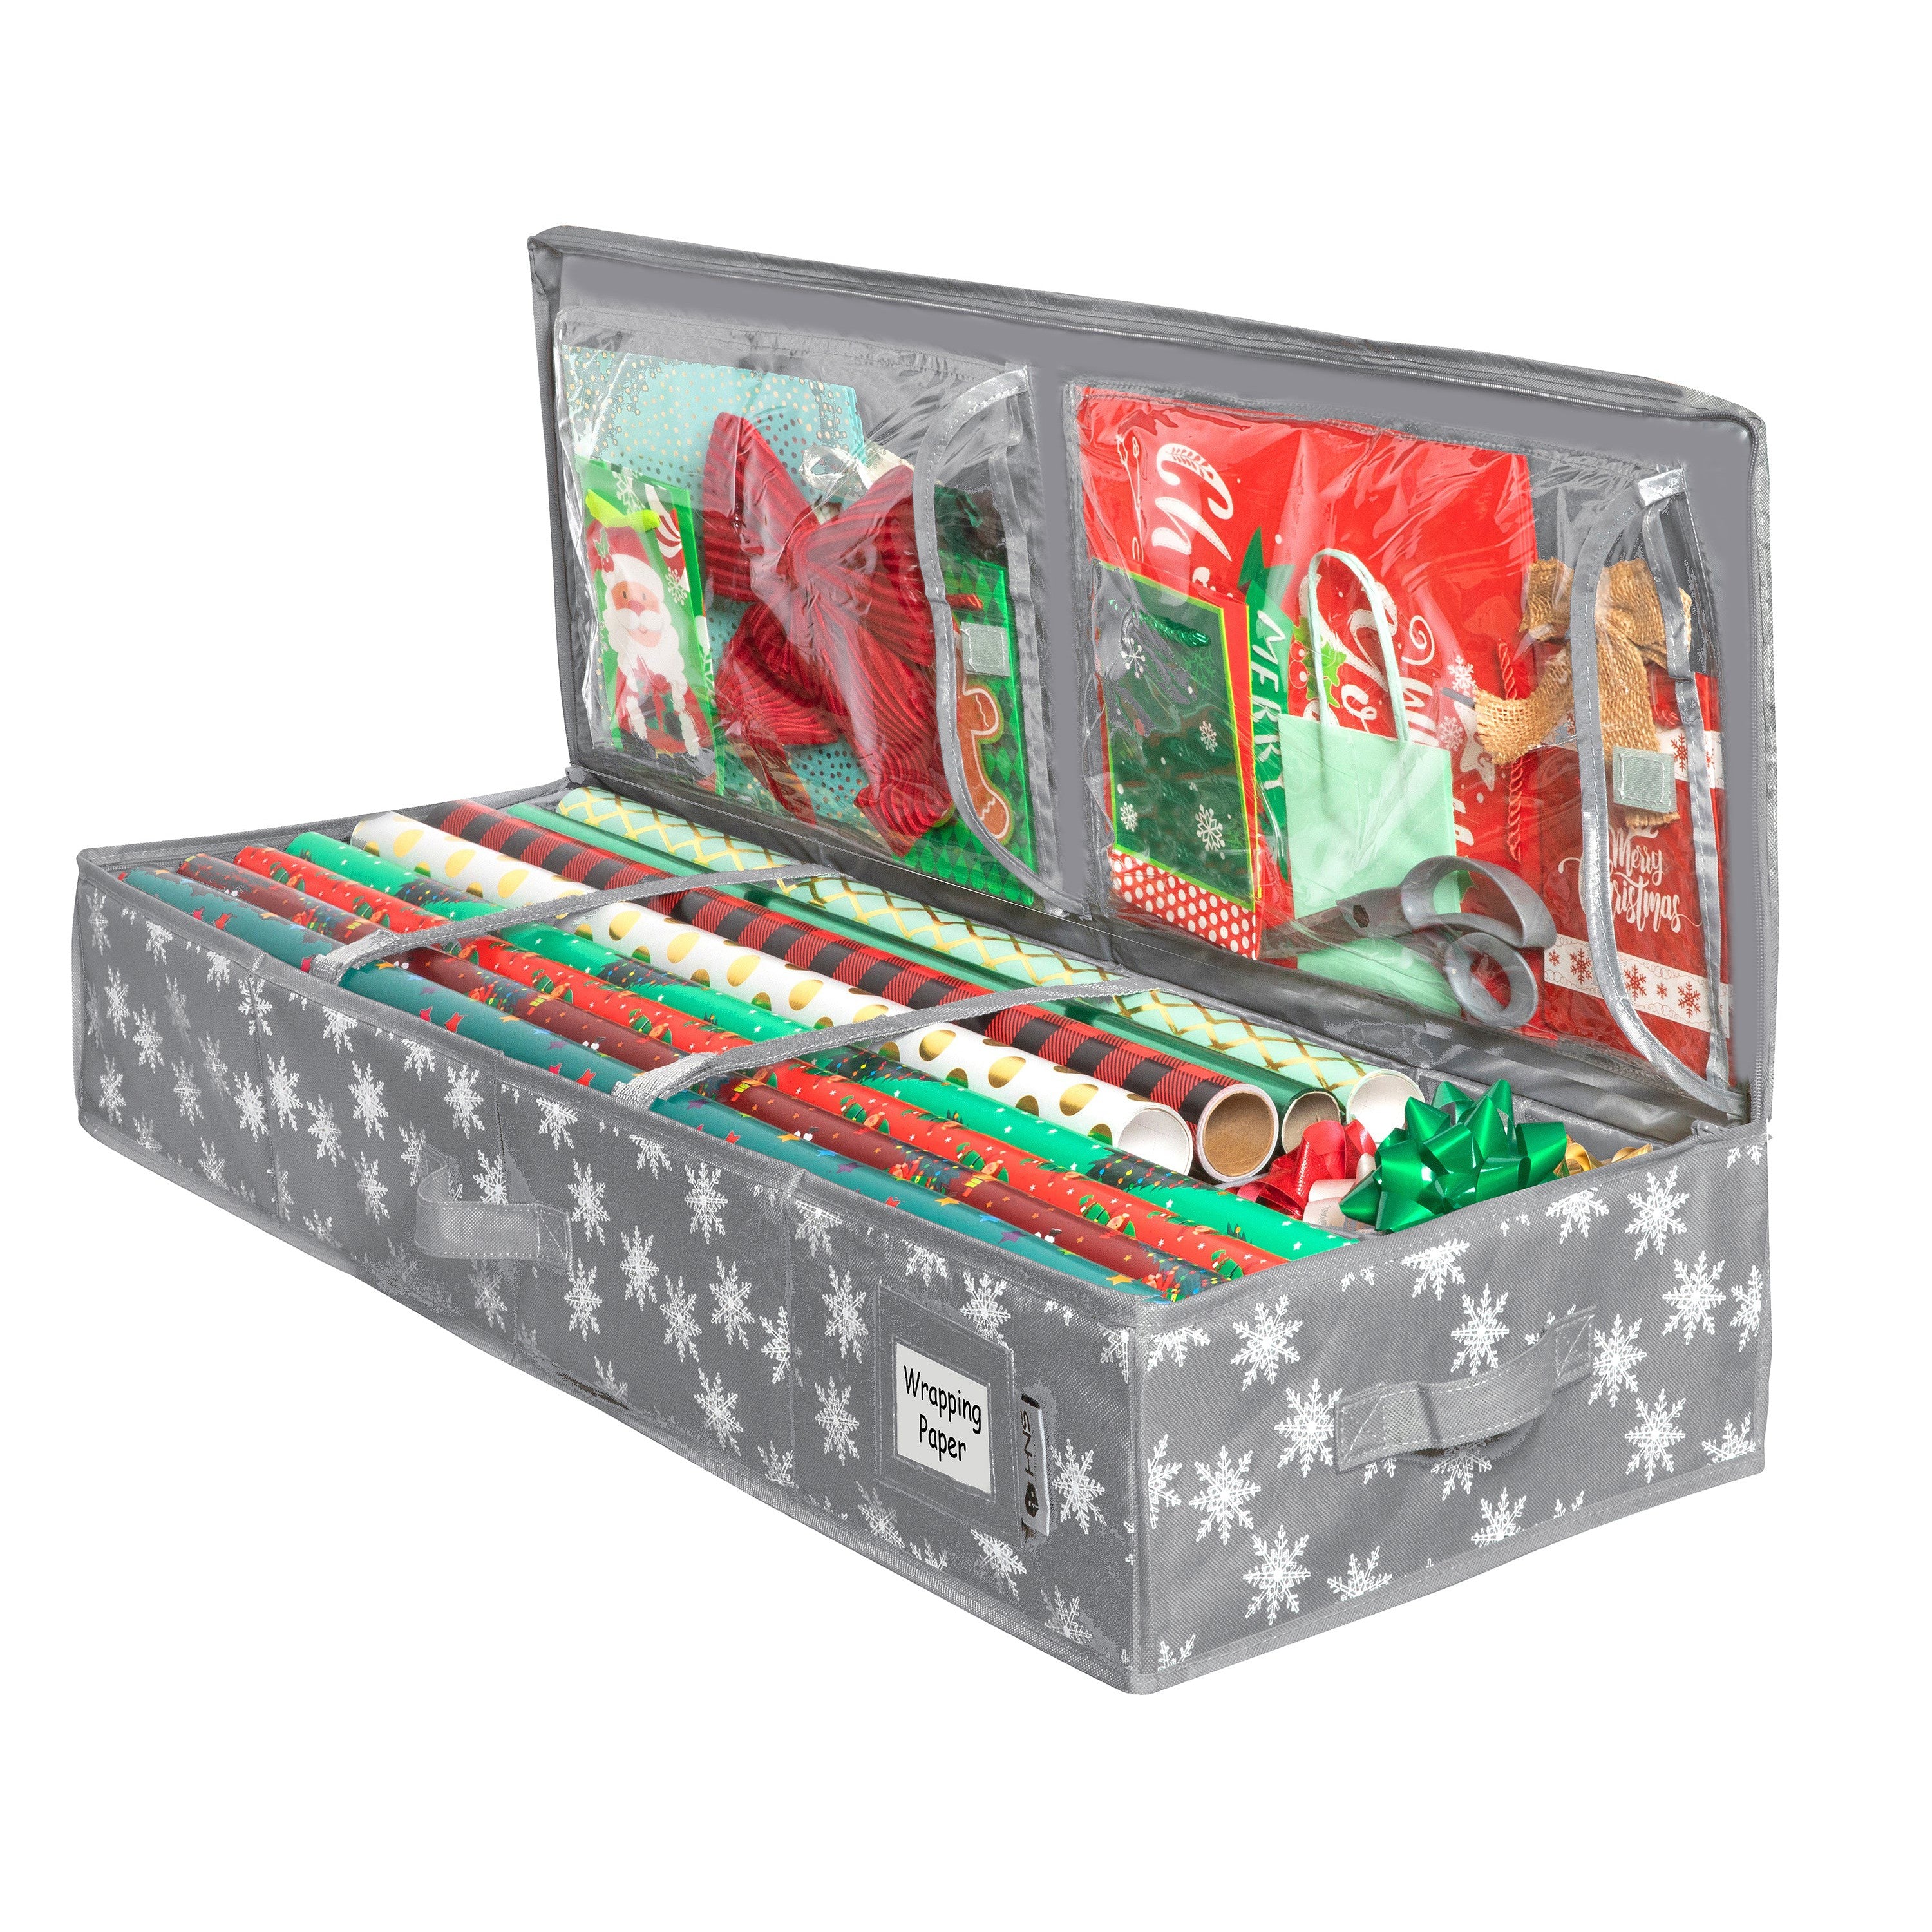 Wrapping Paper Storage Container – Up to 40” Rolls - Fits up to 27 Rolls 1 3/8” Diam. - Underbed Gift Wrap Organizer Bags, Wrapping Paper Rolls, Ribbon, and Bows - Under Bed- Tear-Resistant Durable Material 600D